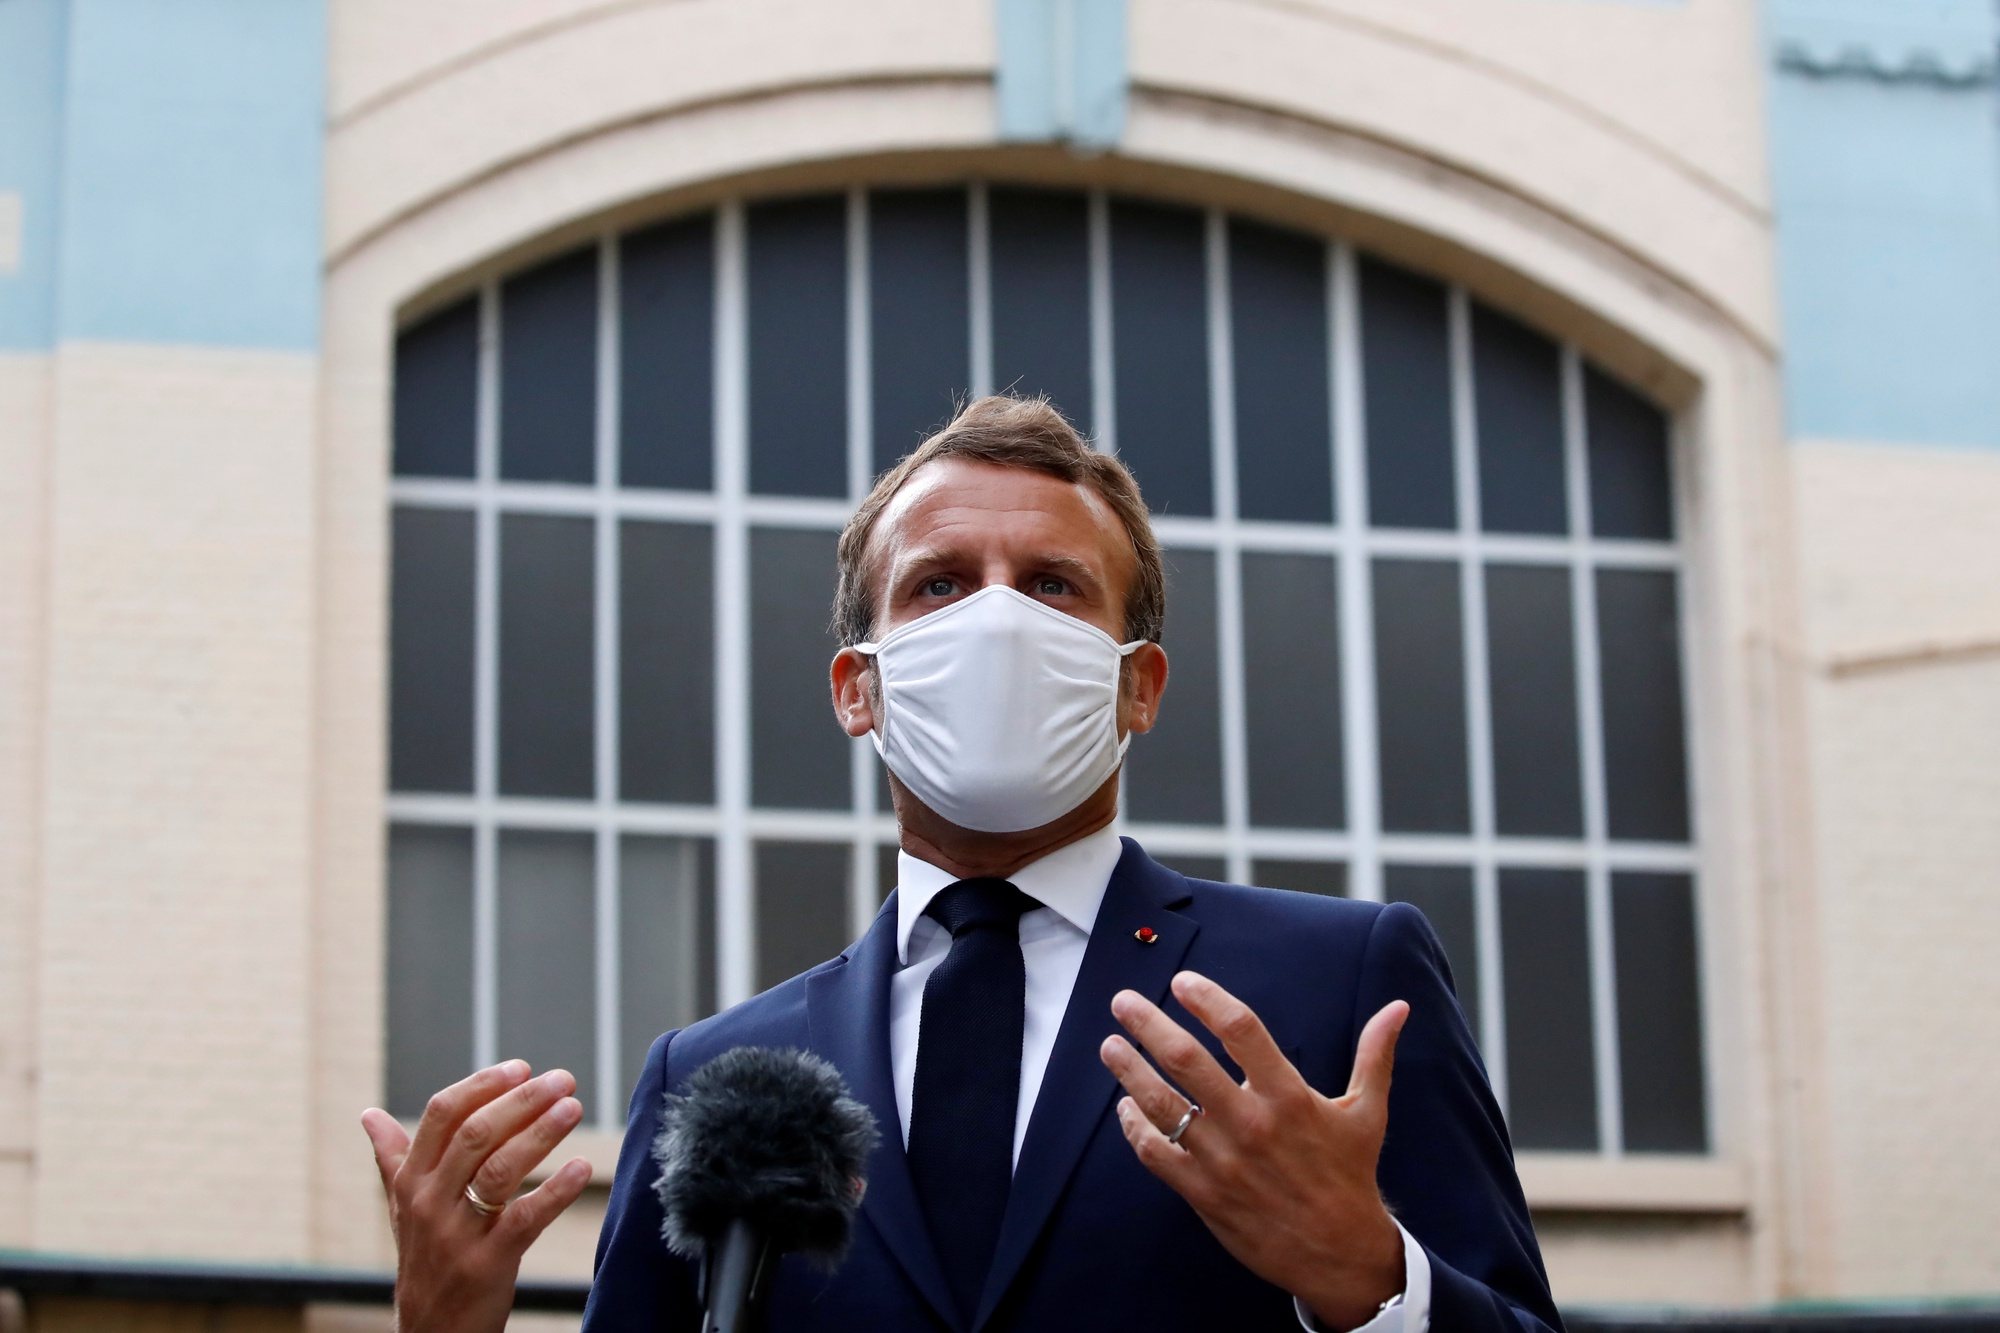 epa08630946 French President Emmanuel Macron, wearing a protective face mask, delivers a speech as he visits a site of pharmaceutical group Seqens, a global leader on the production of active pharmaceutical ingredients, to mobilize innovation and support the research on the coronavirus disease (COVID-19), in Villeneuve-la-Garenne, France, 28 August 2020.  EPA/CHRISTIAN HARTMANN / POOL  MAXPPP OUT